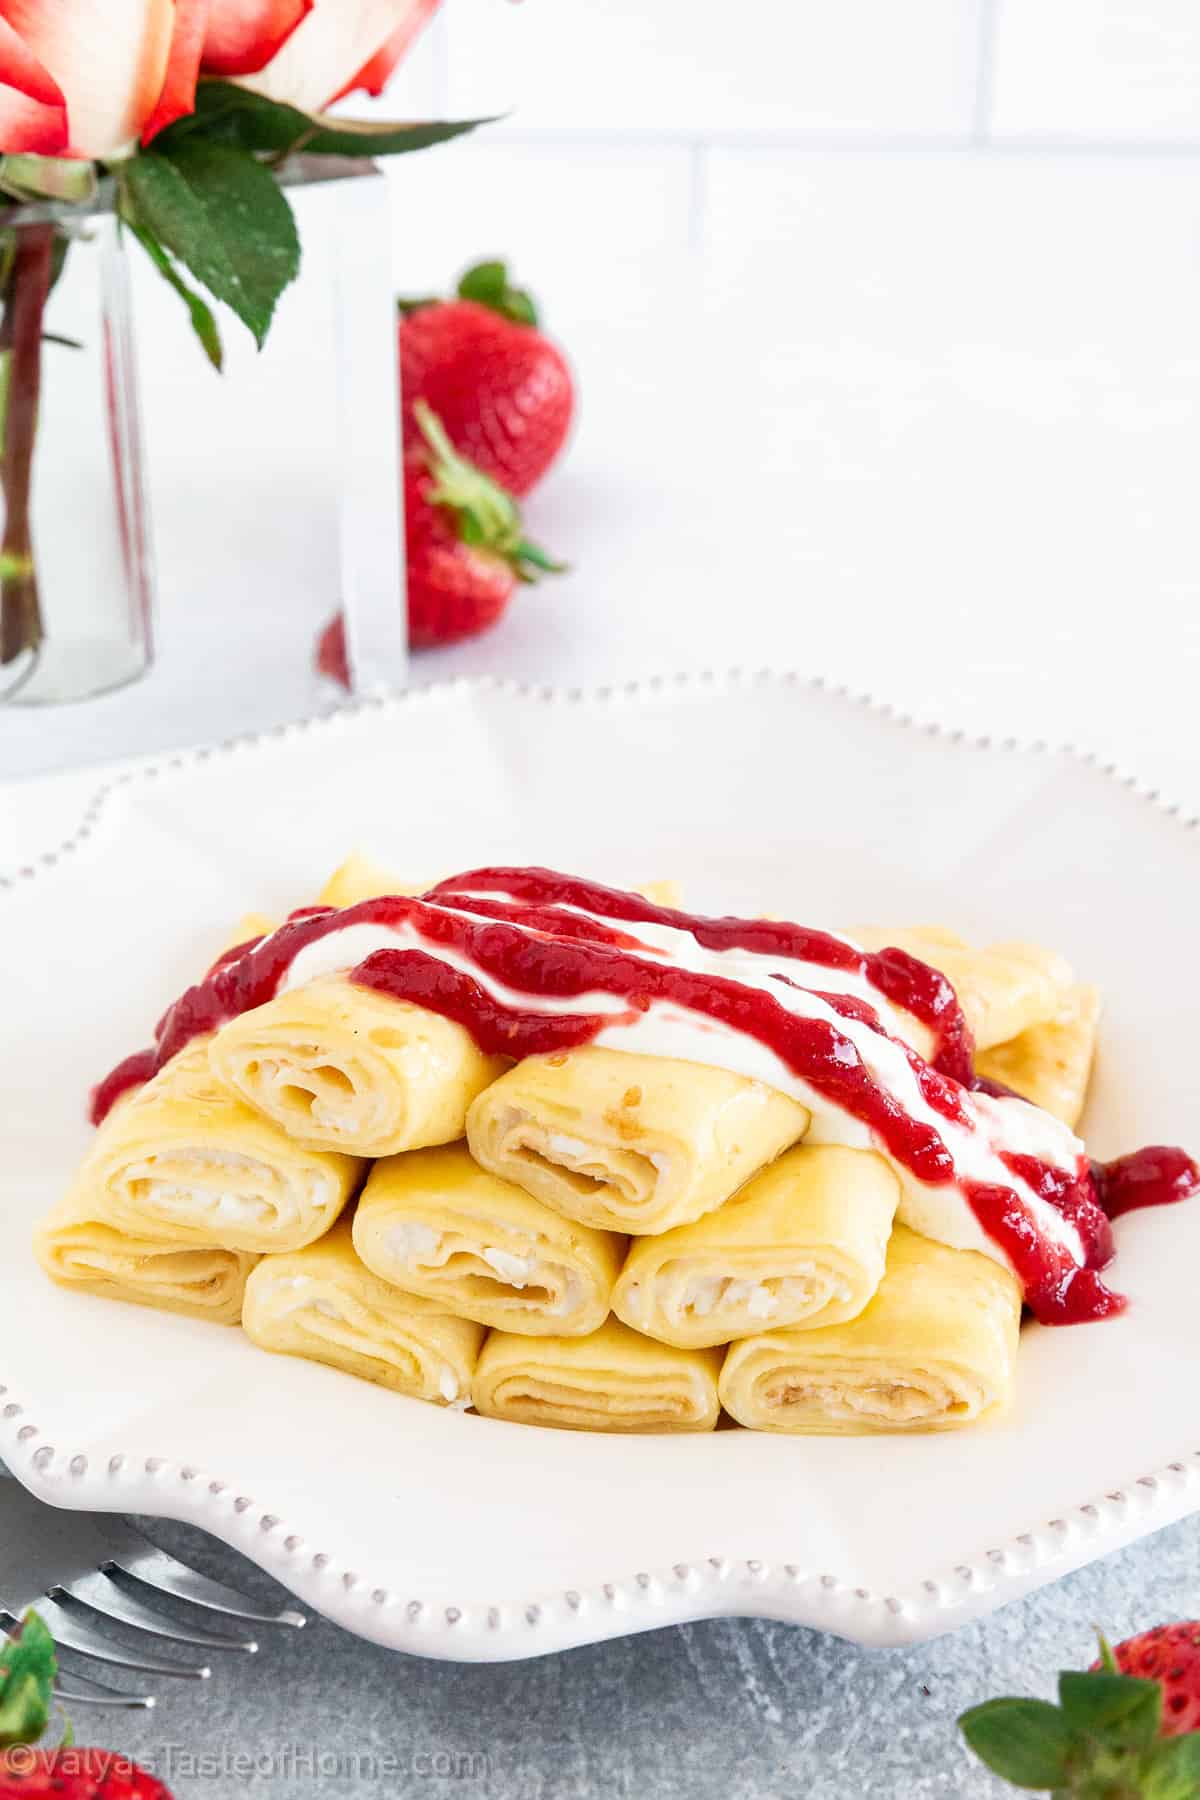 If you're looking for delicious, filled crepes that are soft and absolutely melt in your mouth, then you need to try Nalisniki!